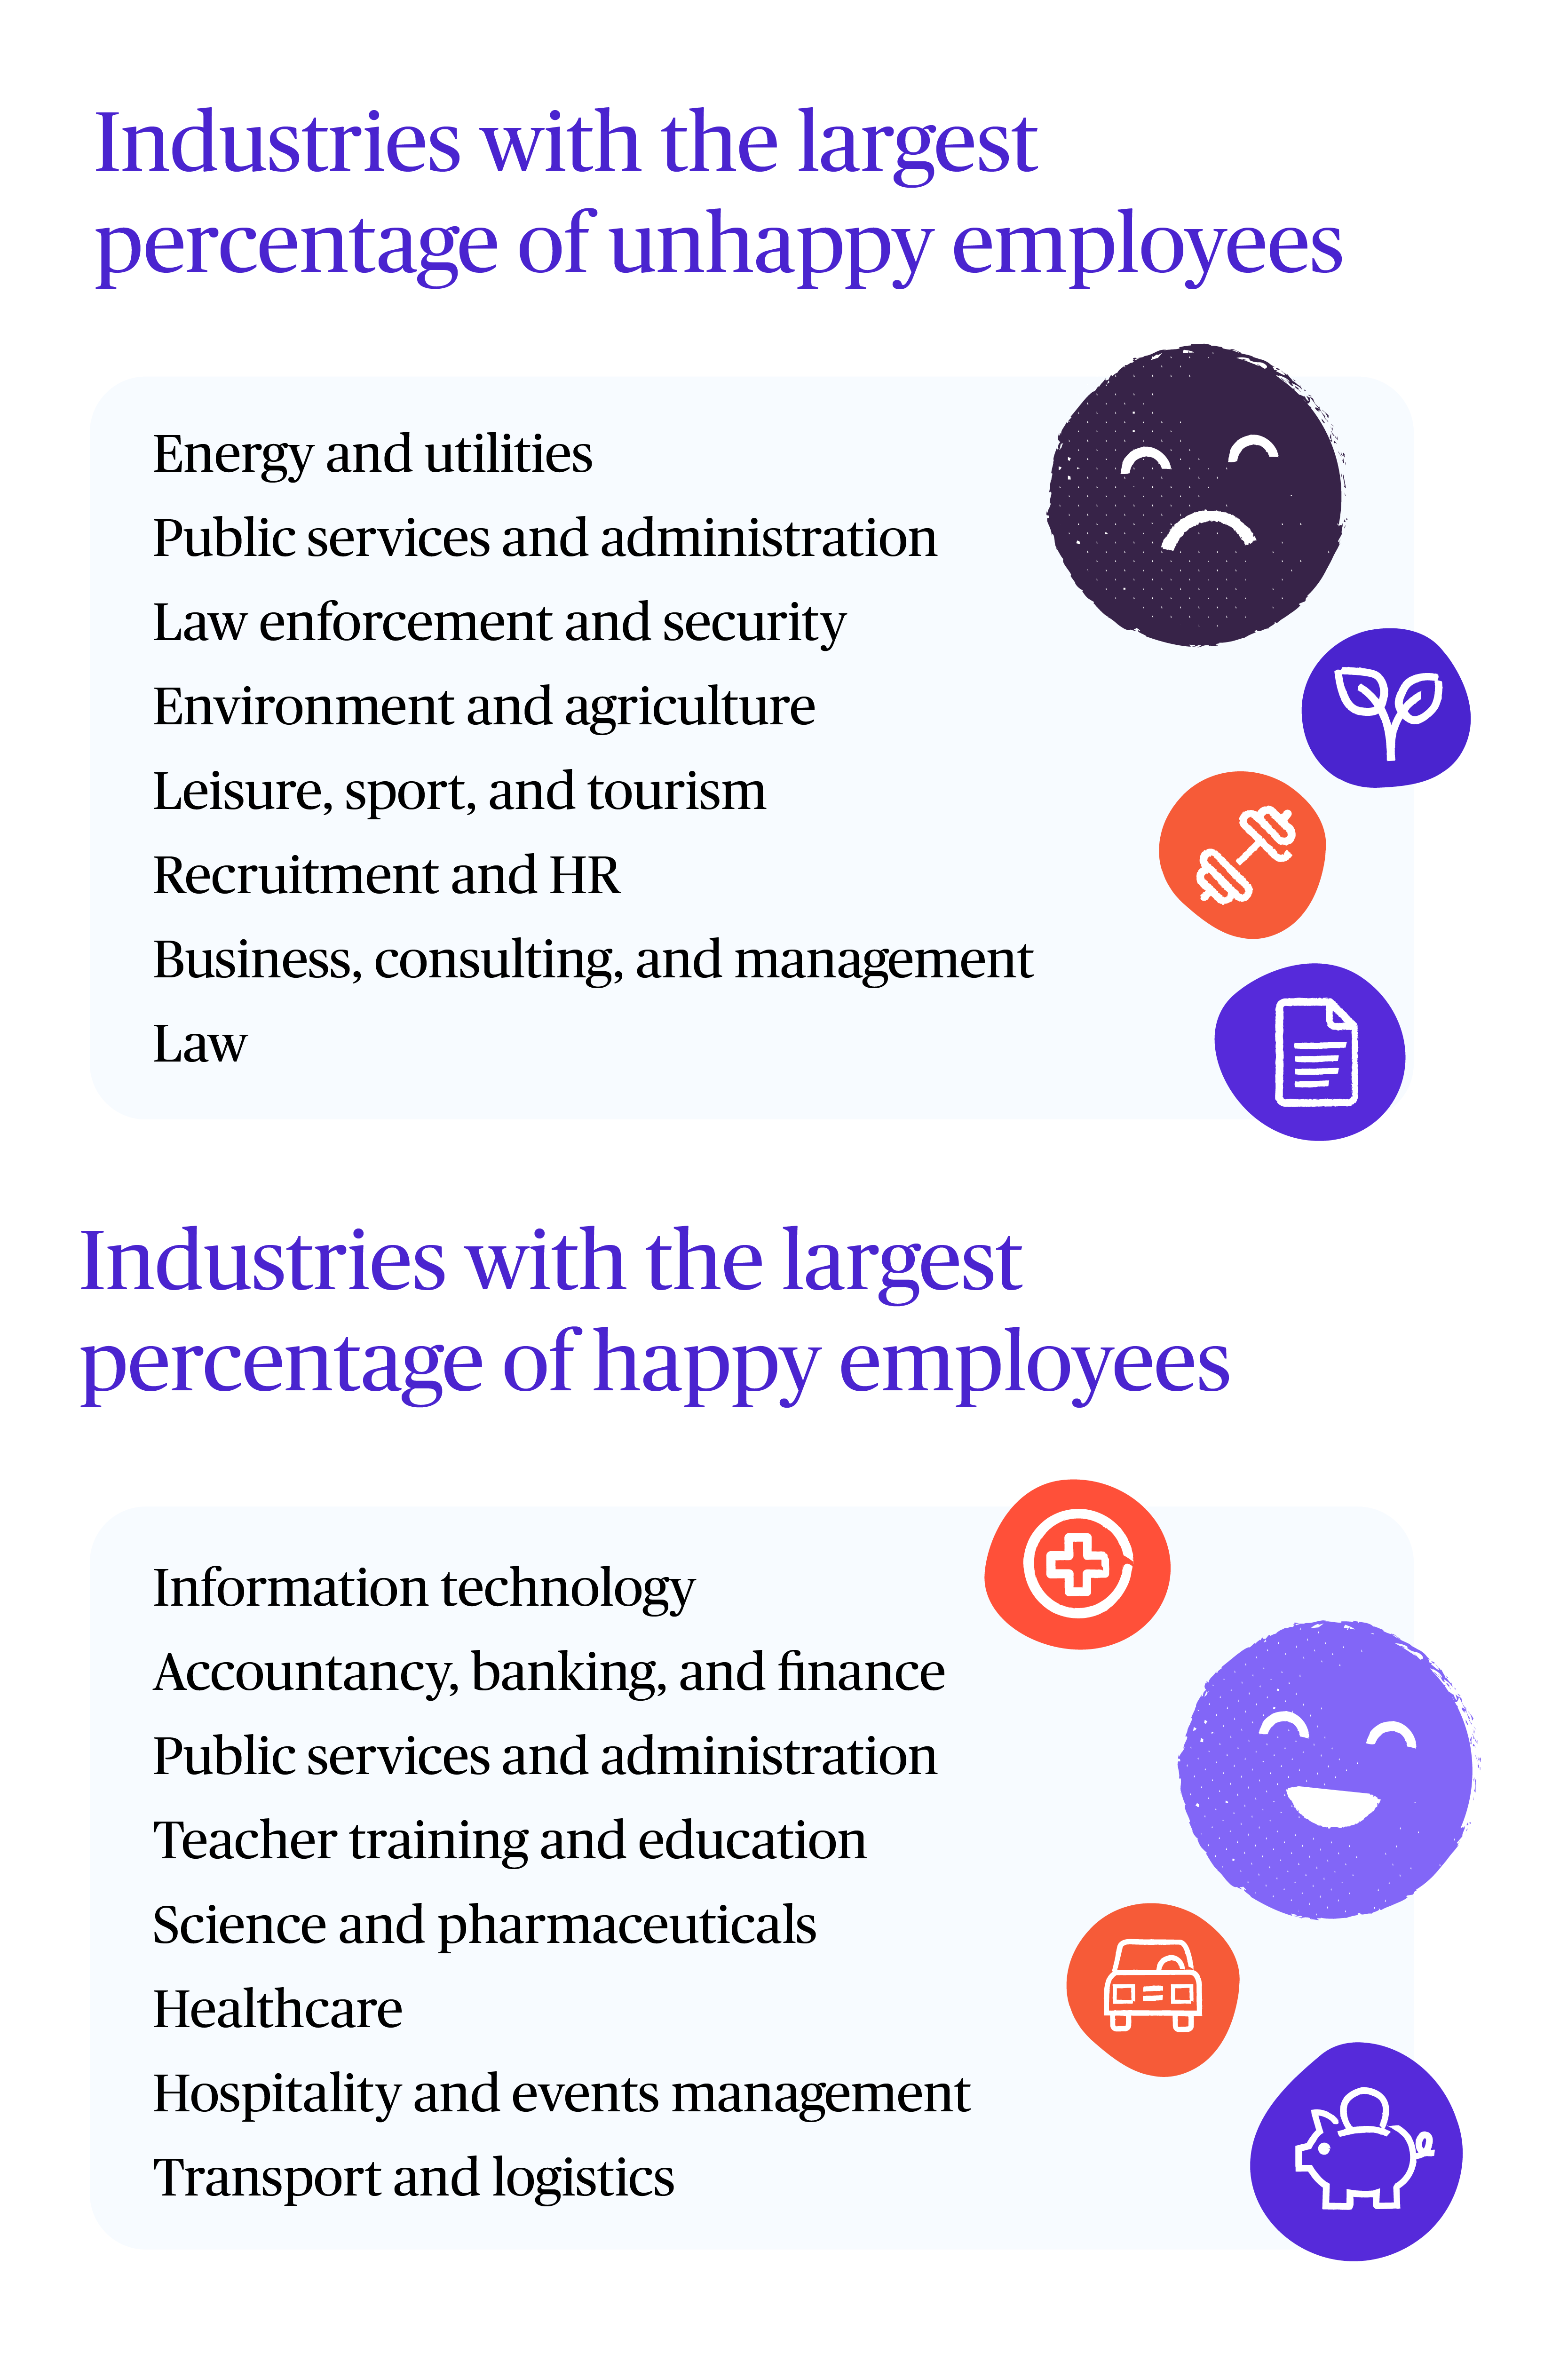 Table Showing The Industries With The Happiest and Unhappiest Staff